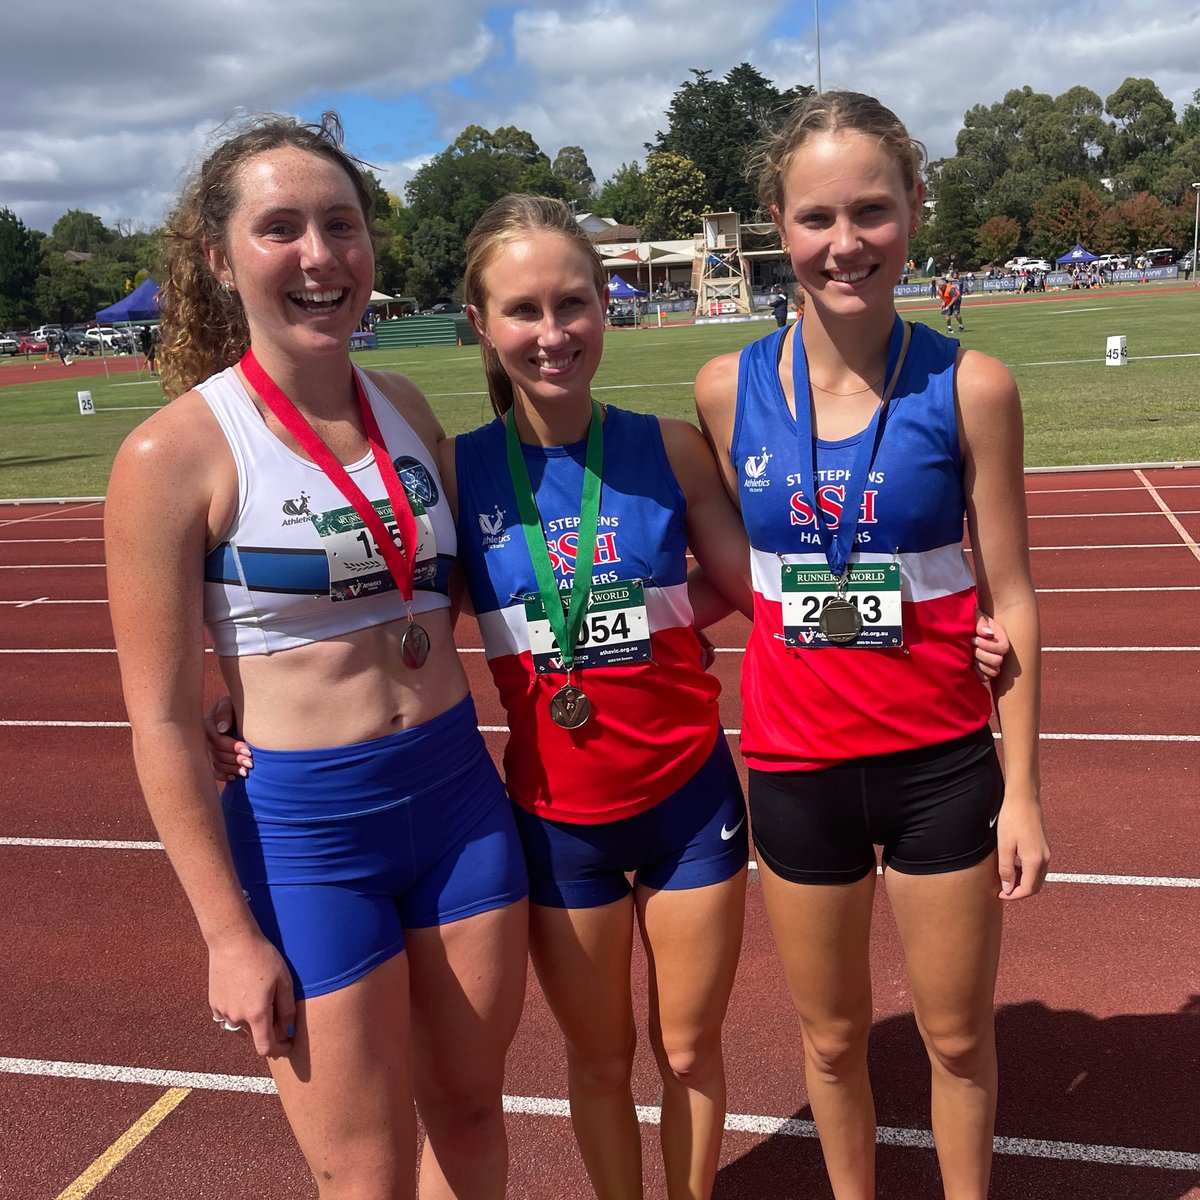 Congrats to Alice Oakley-Kerr (OW2020), Zoe Woods (OW2020) and Meg Oakley-Kerr (OW2018) on their history-making trifecta at the Vic State Track and Field Championships. First, second and third respectively in the Women's Open 3000m Steeplechase - a first for Wesley!